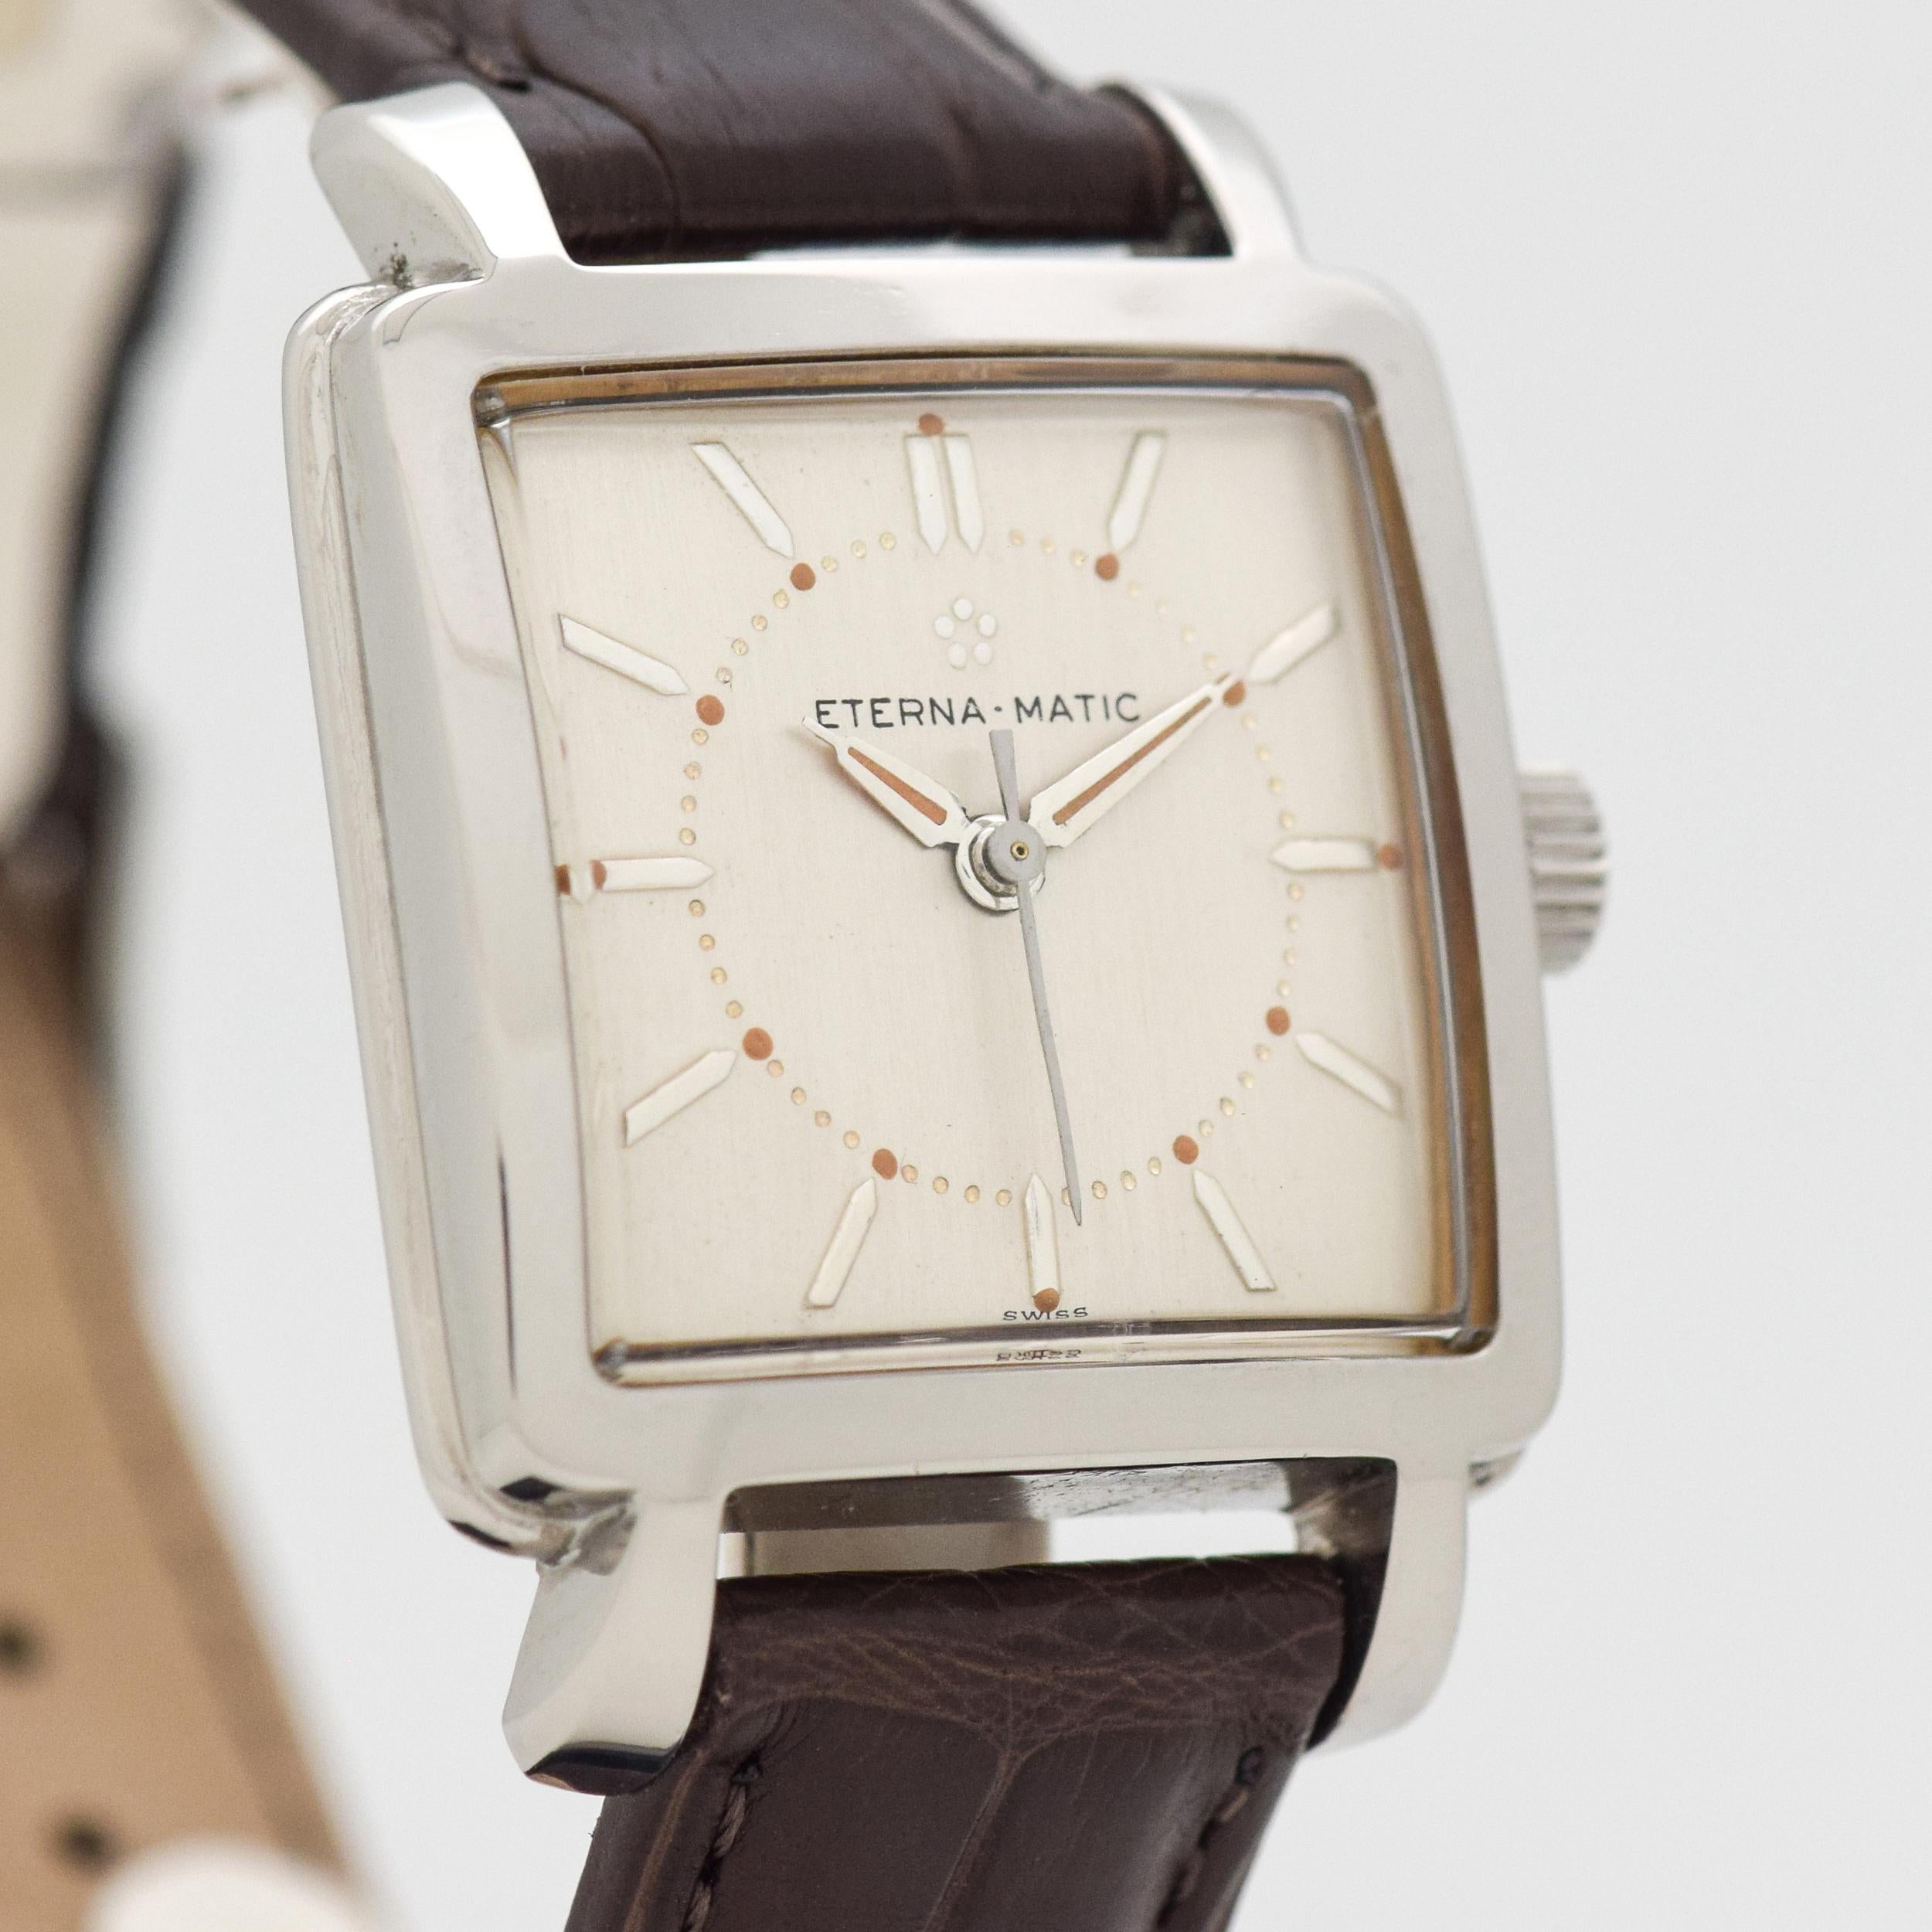 1952 Vintage Eterna Eterna-Matic Stainless Steel Square Automatic watch with Silver Dial with Steel Pointed Arrow Tip Stick/Bar/Baton Markers. 27mm x 38mm lug to lug (1.06 in. x 1.5 in.) - 17 jewel, automatic caliber movement. Triple Signed.